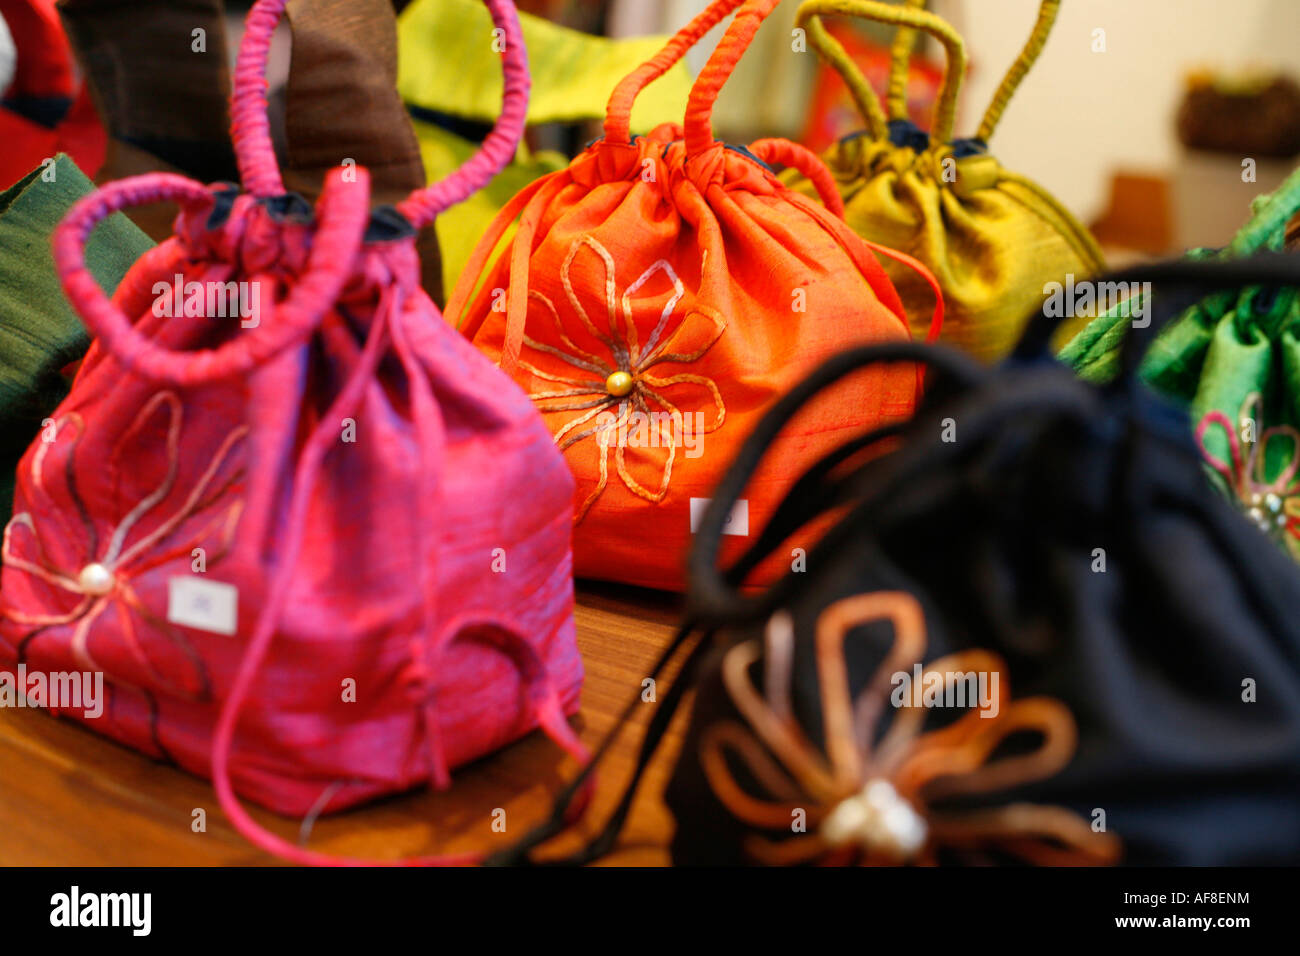 Colourful bags in a shop, Simply Home Furnishings, Washington DC, United States, USA Stock Photo